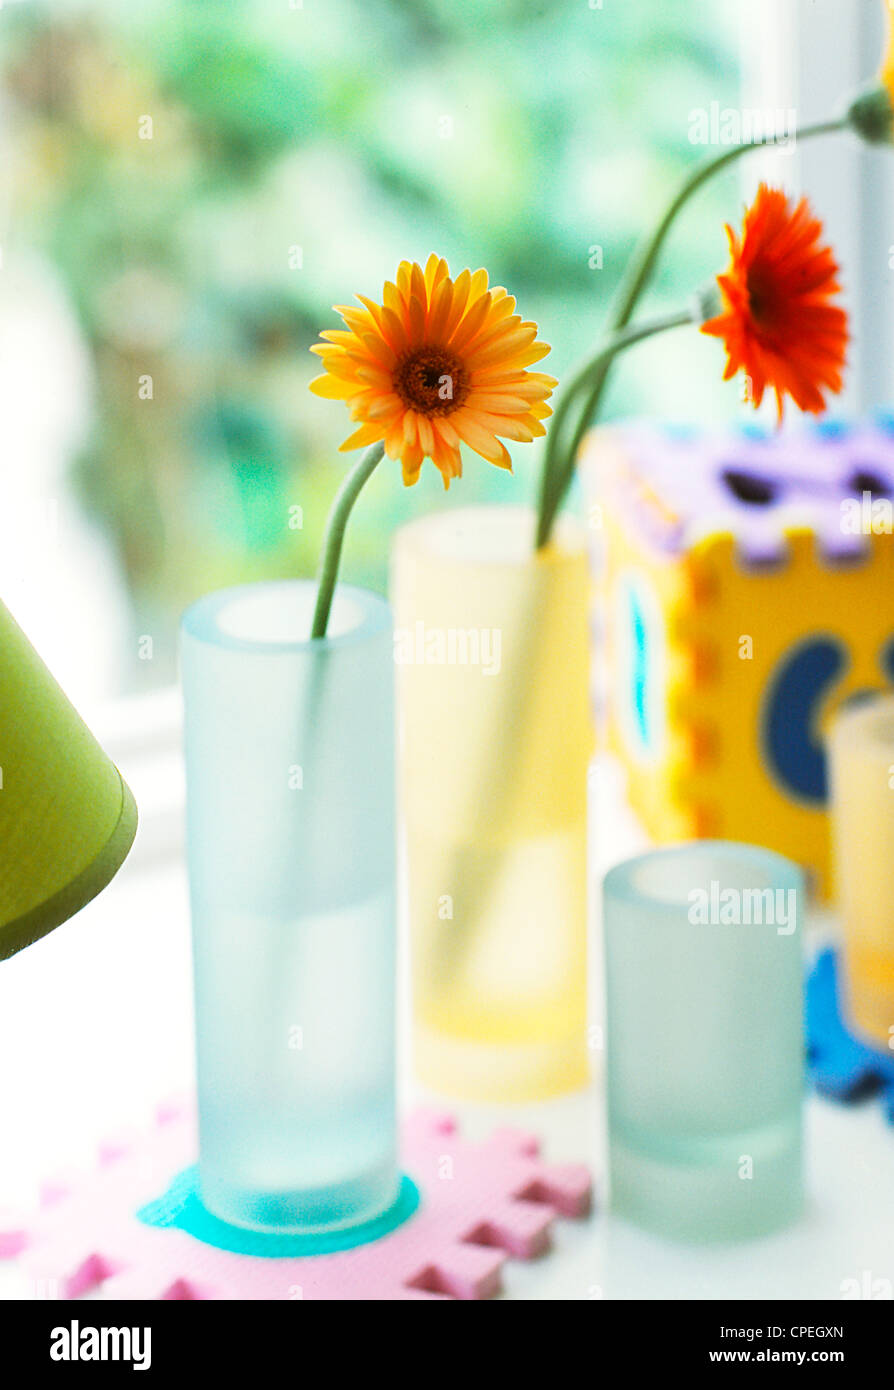 Bright Color Daisy Flower In Vase Stock Photo